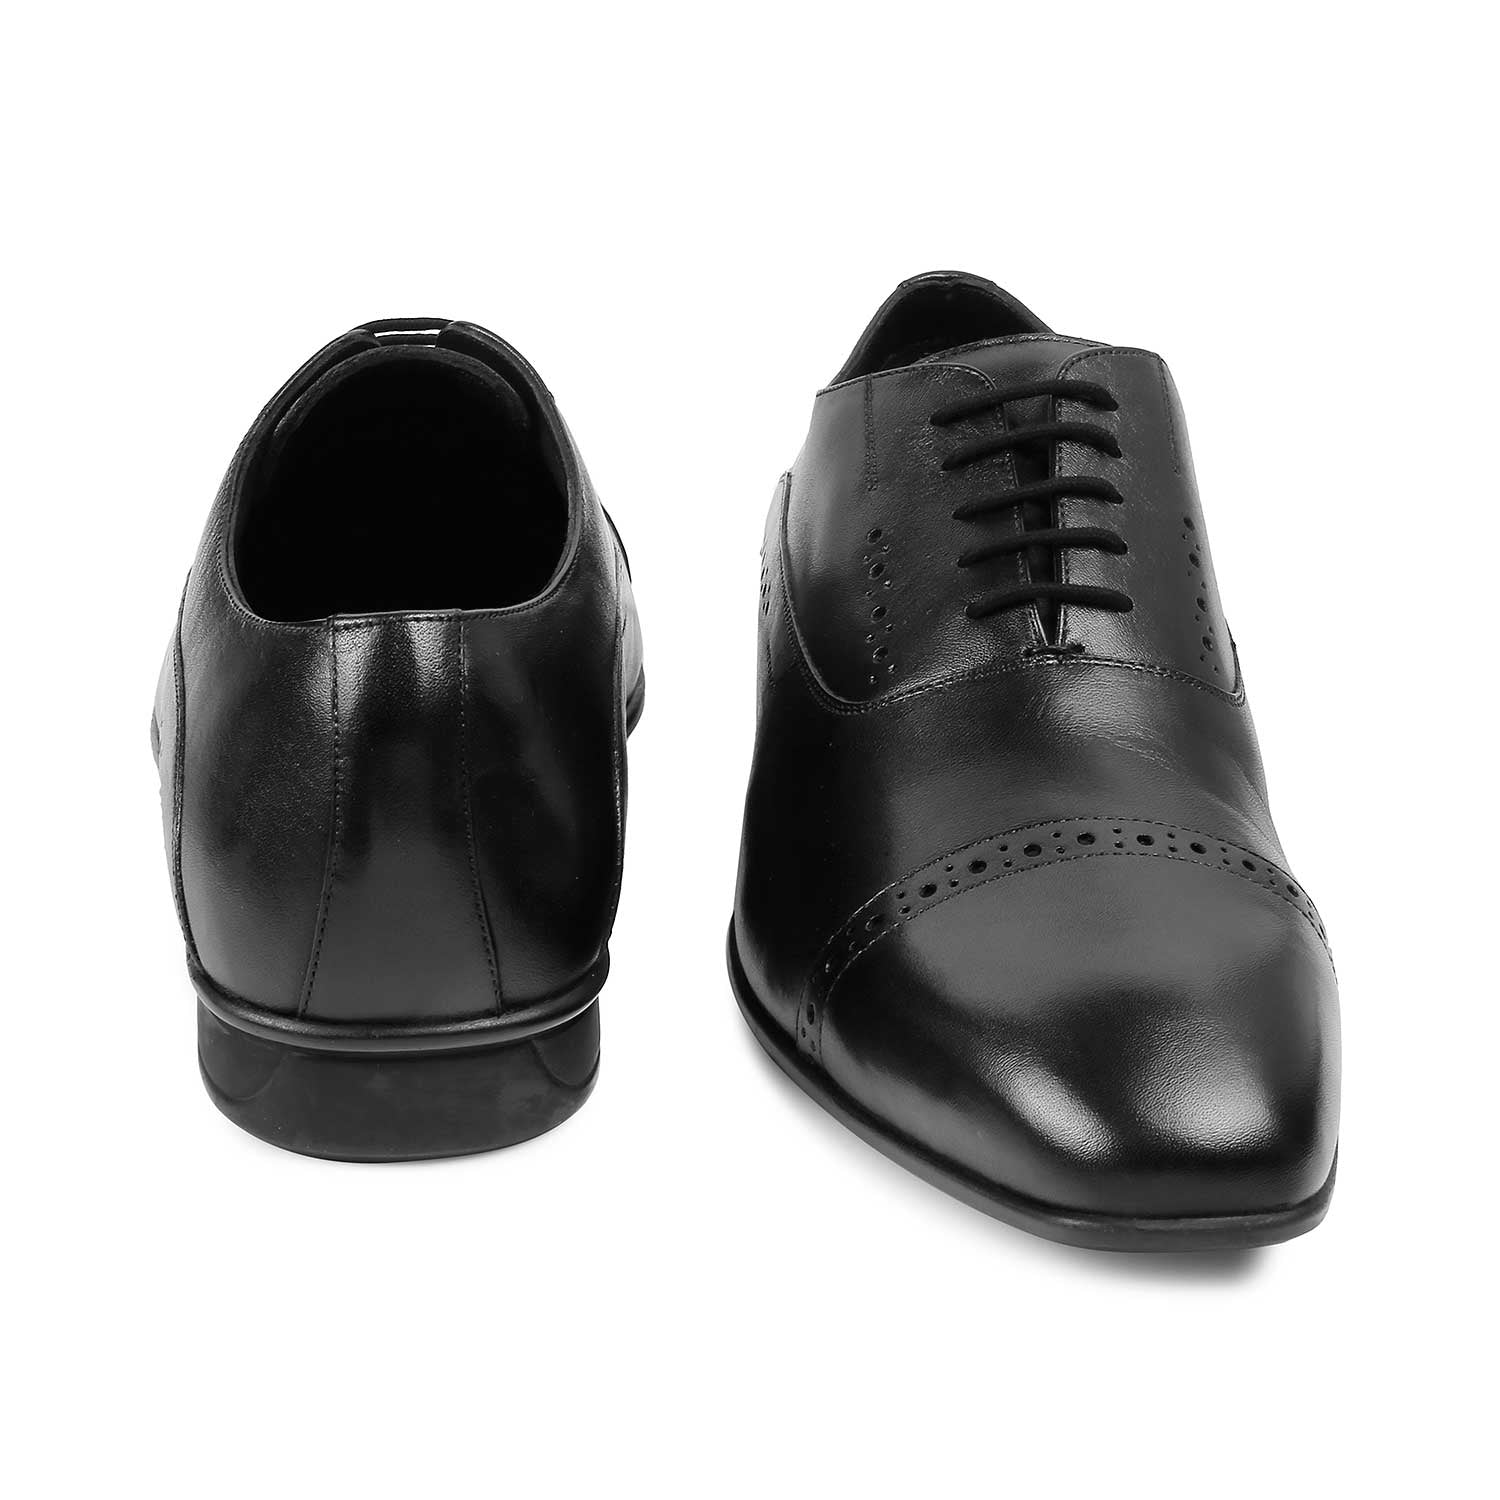 The Togford Black Men's Oxford Lace Ups Tresmode - Tresmode